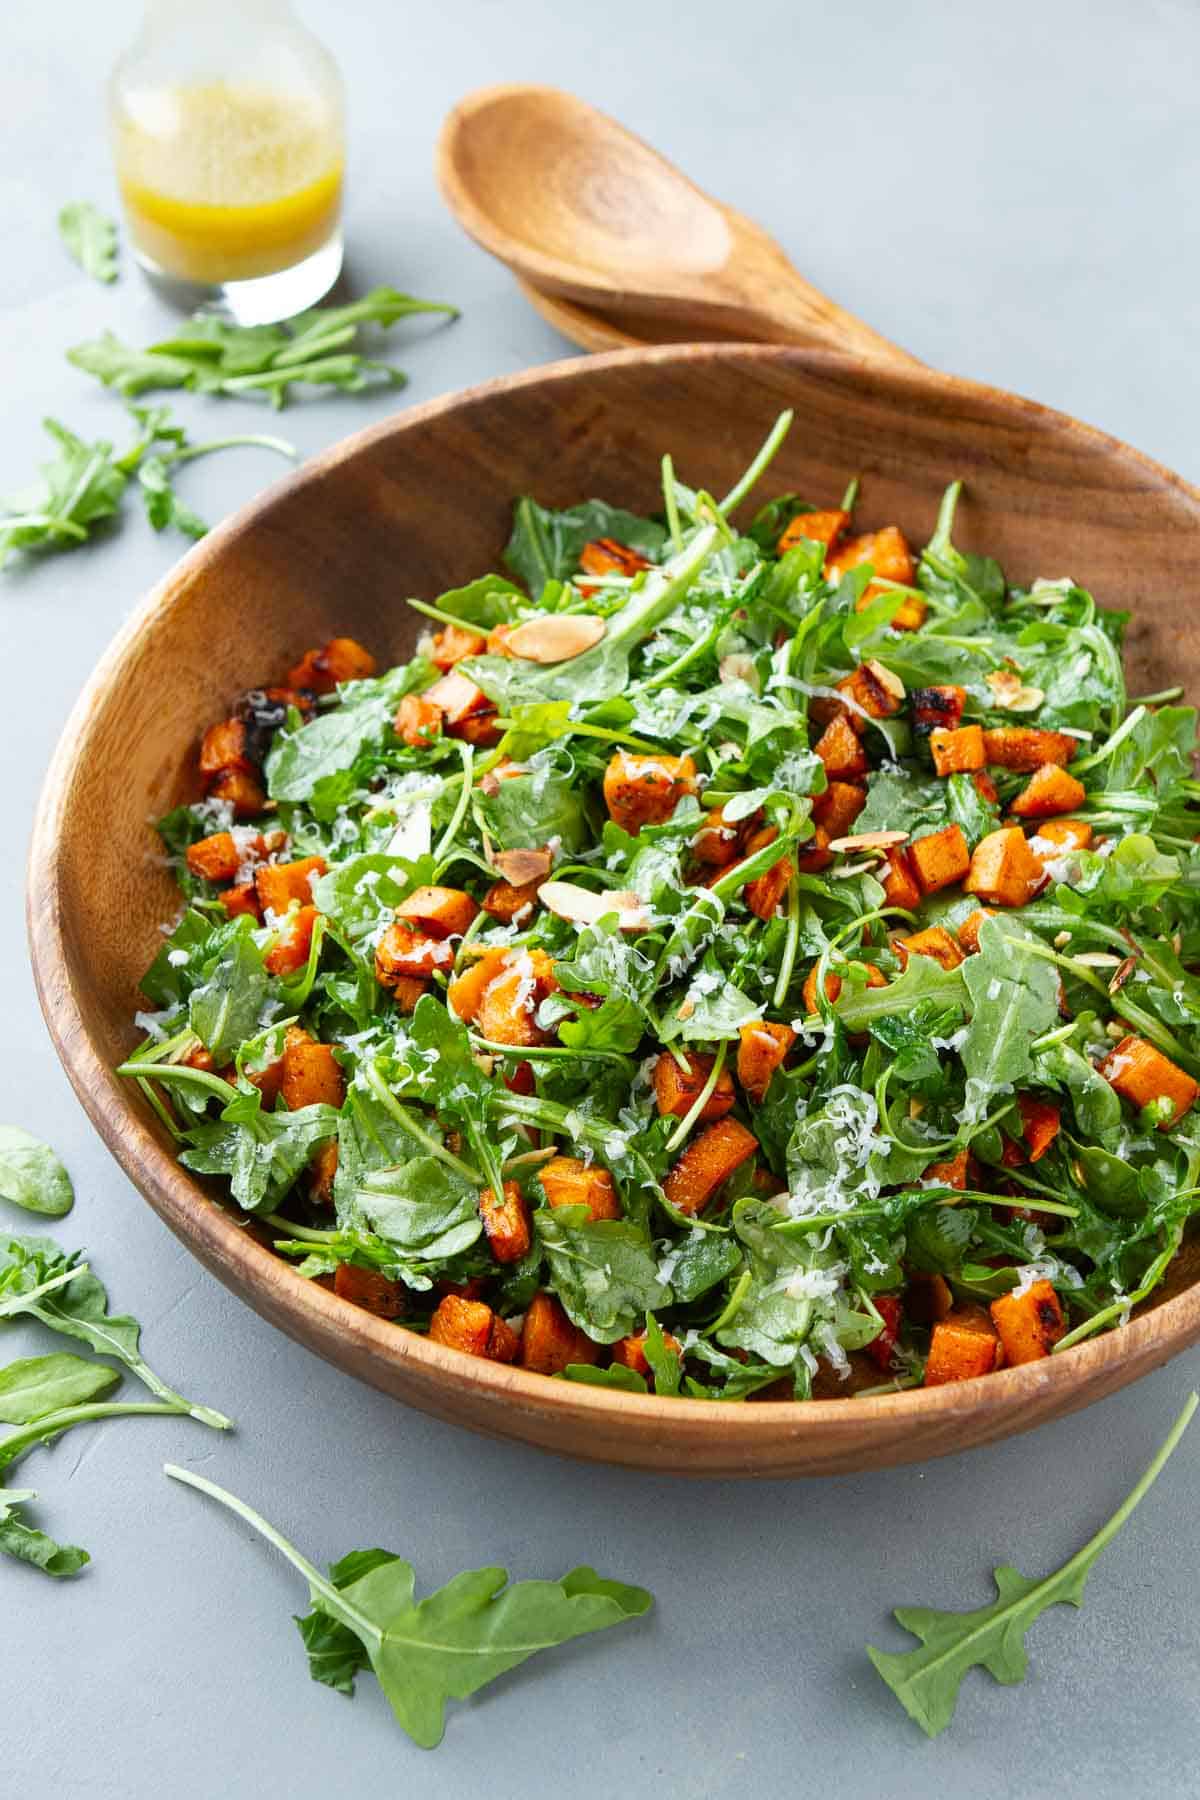 This sweet potato arugula salad is the perfect balance of sweet and savory flavors. Serve it as a healthy weeknight side dish or save it for a special holiday meal. | Recipe | Vegetarian